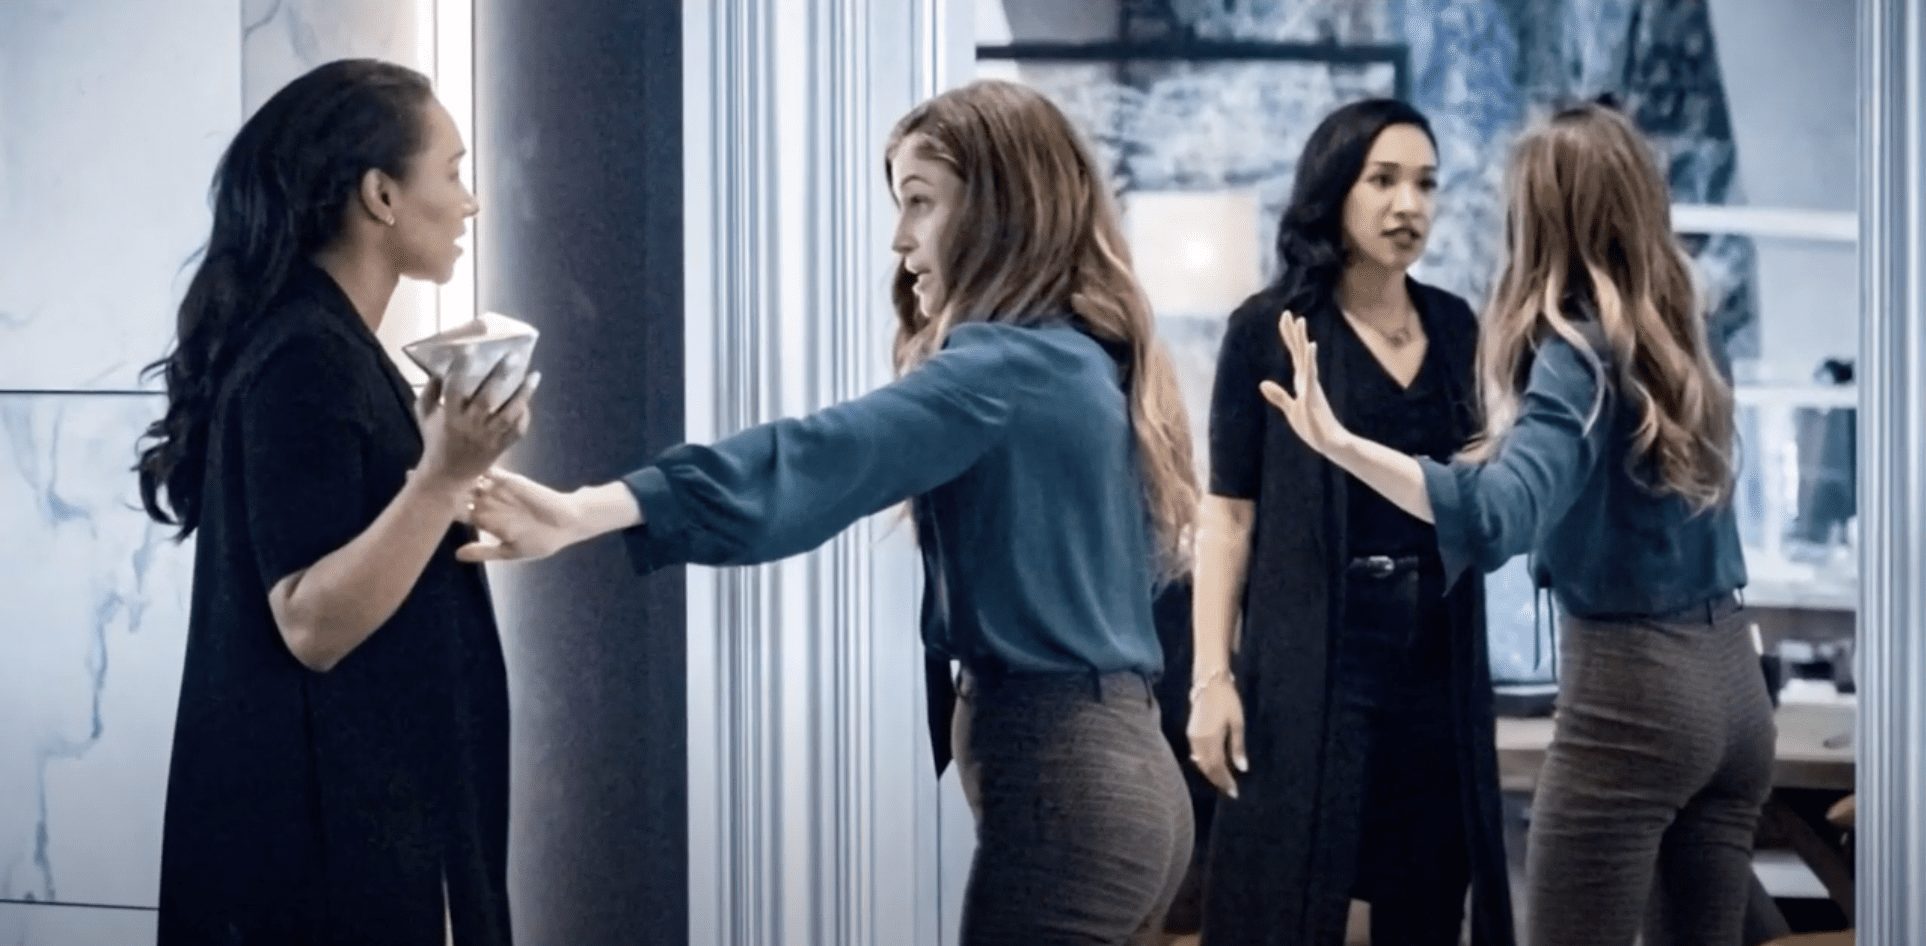 iris west-allen and eva mcculloch in the mirrorverse in the flash season 6 episode 17 liberation